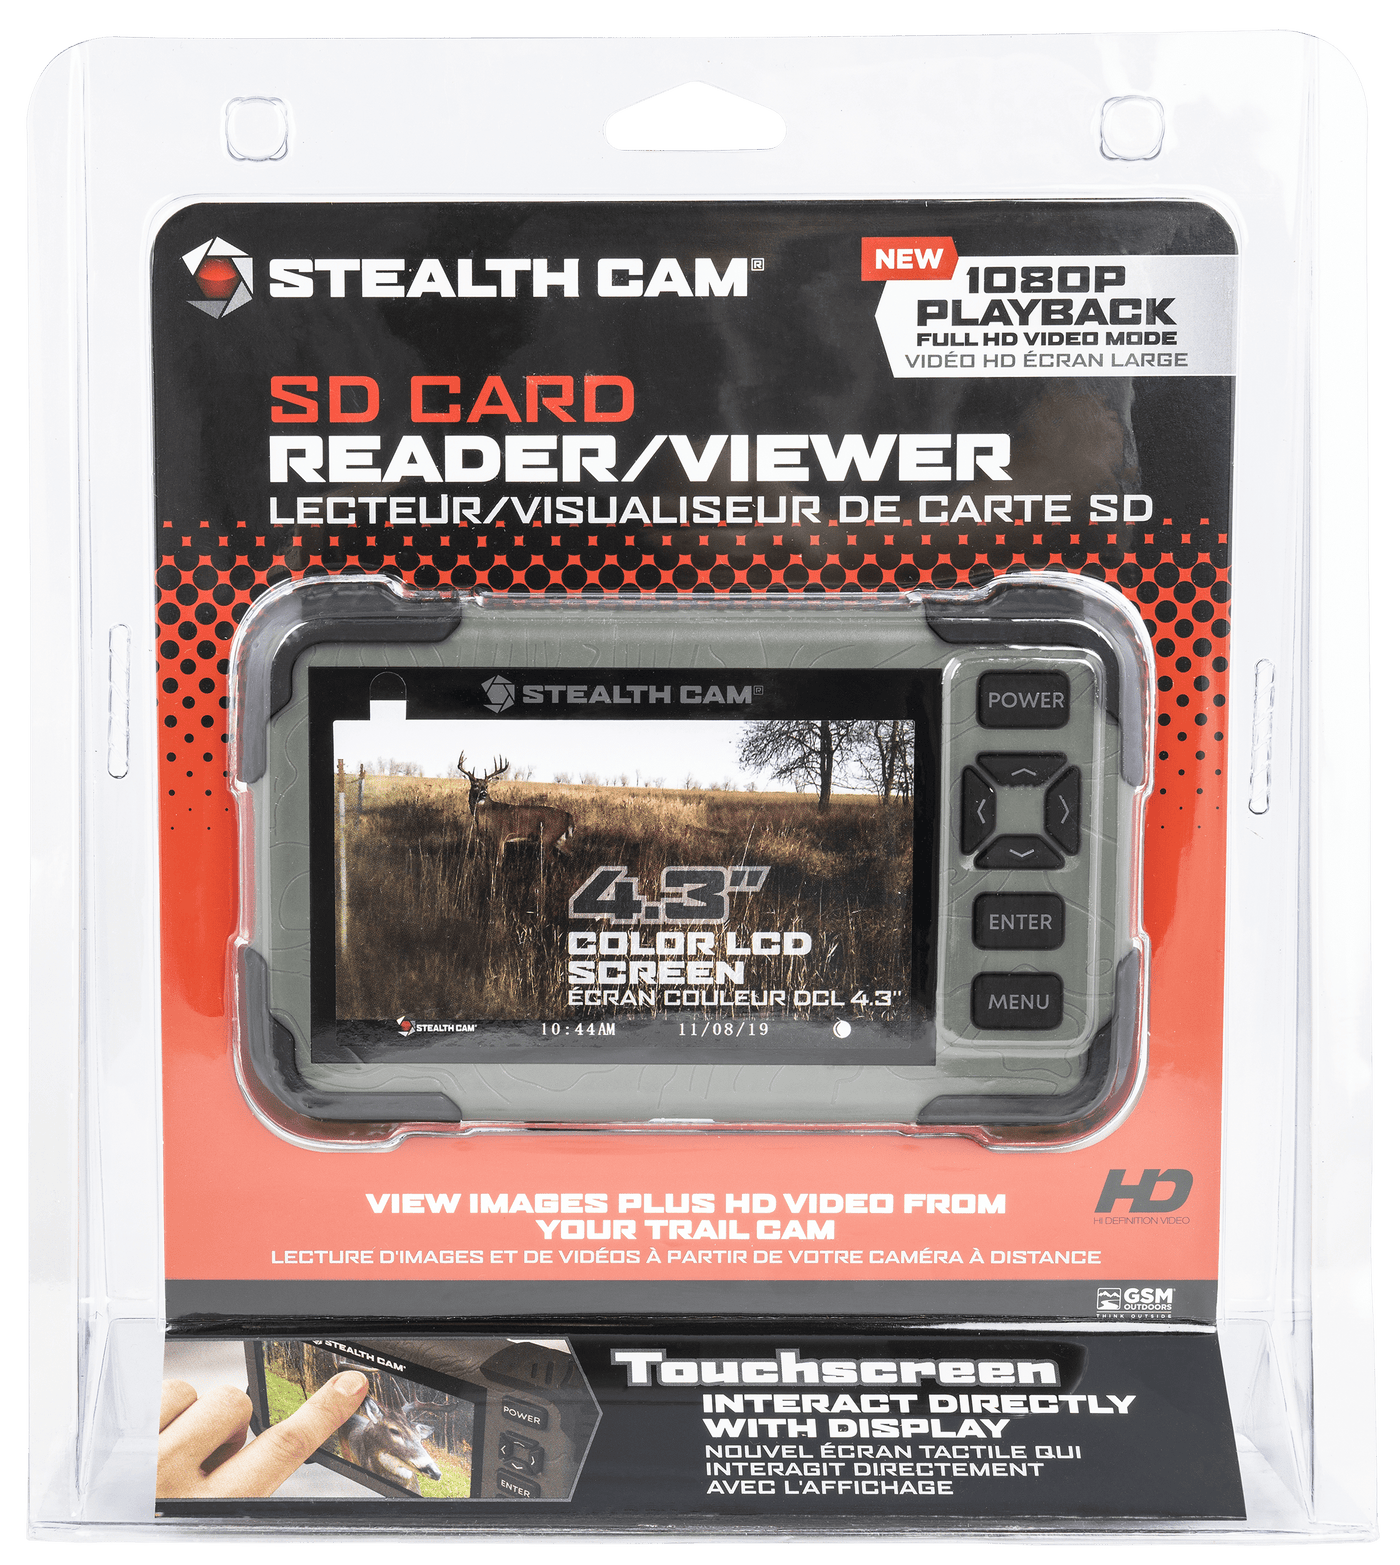 Stealth Cam Stealth Cam Sd Card Viewer, Steal Stc-crv43xhd  1080p Compatible 4.3 Tch Scrn Hunting